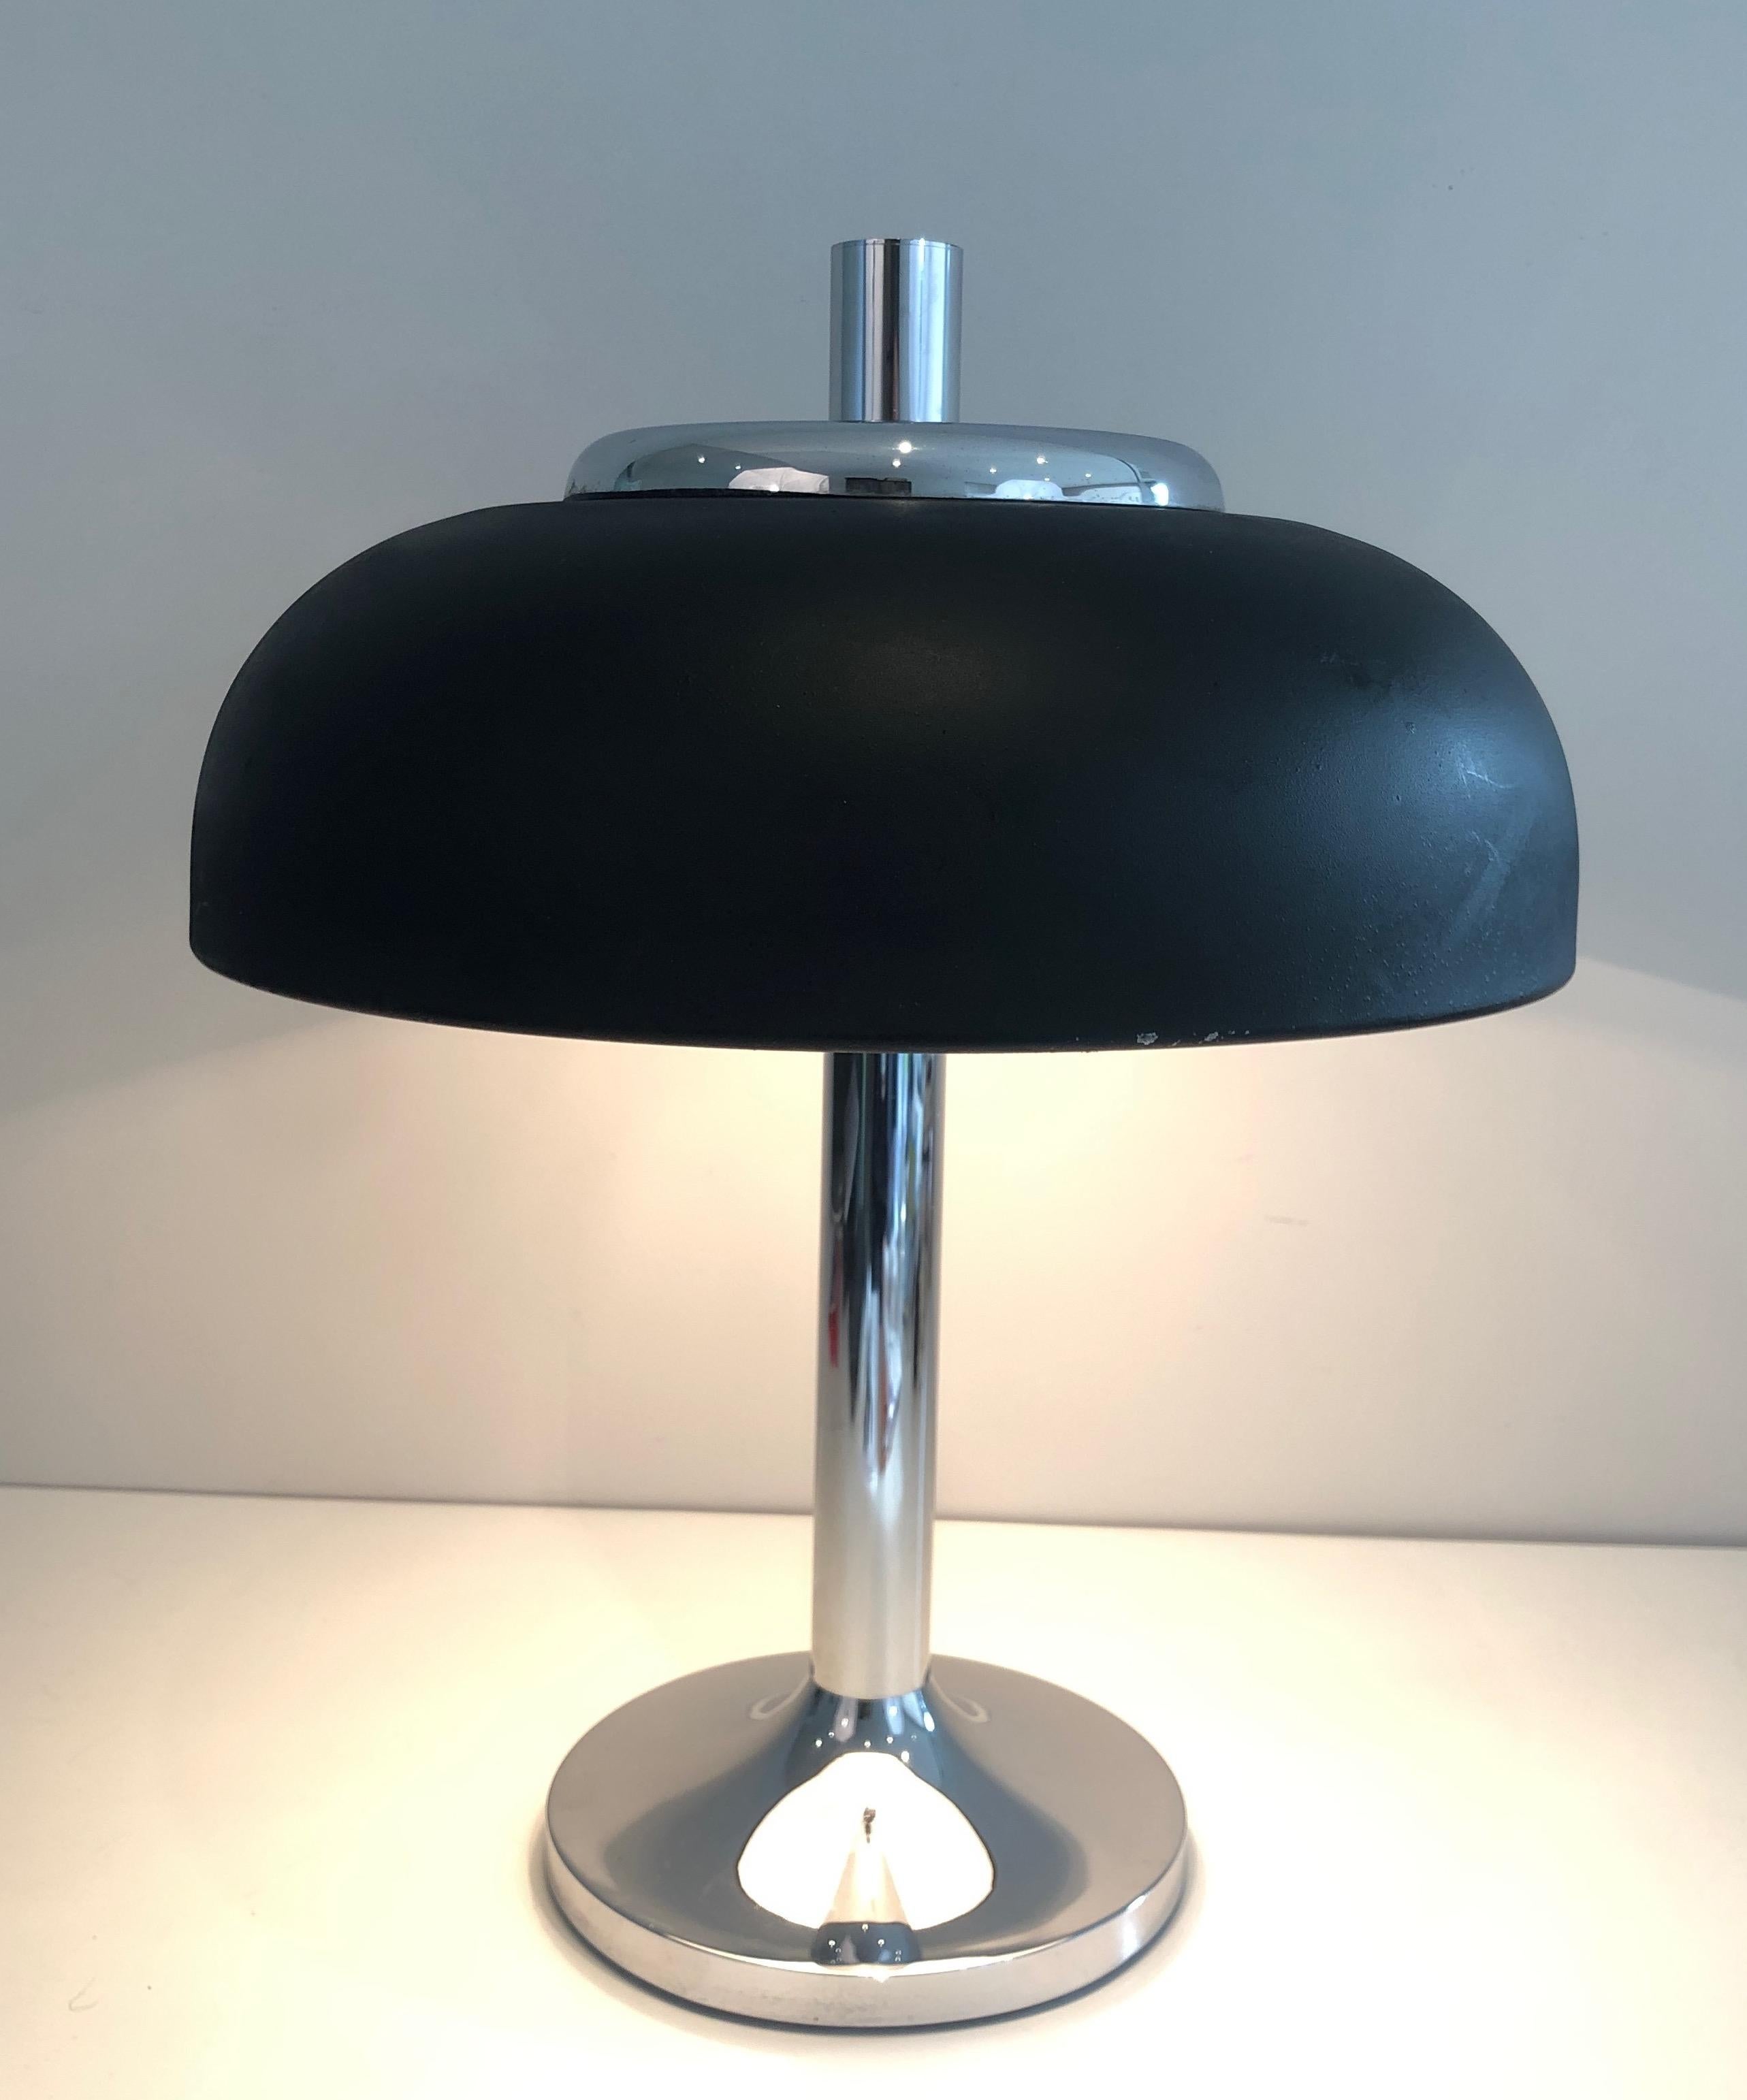 Large Chrome and Black Lacquered Design Table Lamp, French Work, circa 1950 For Sale 7